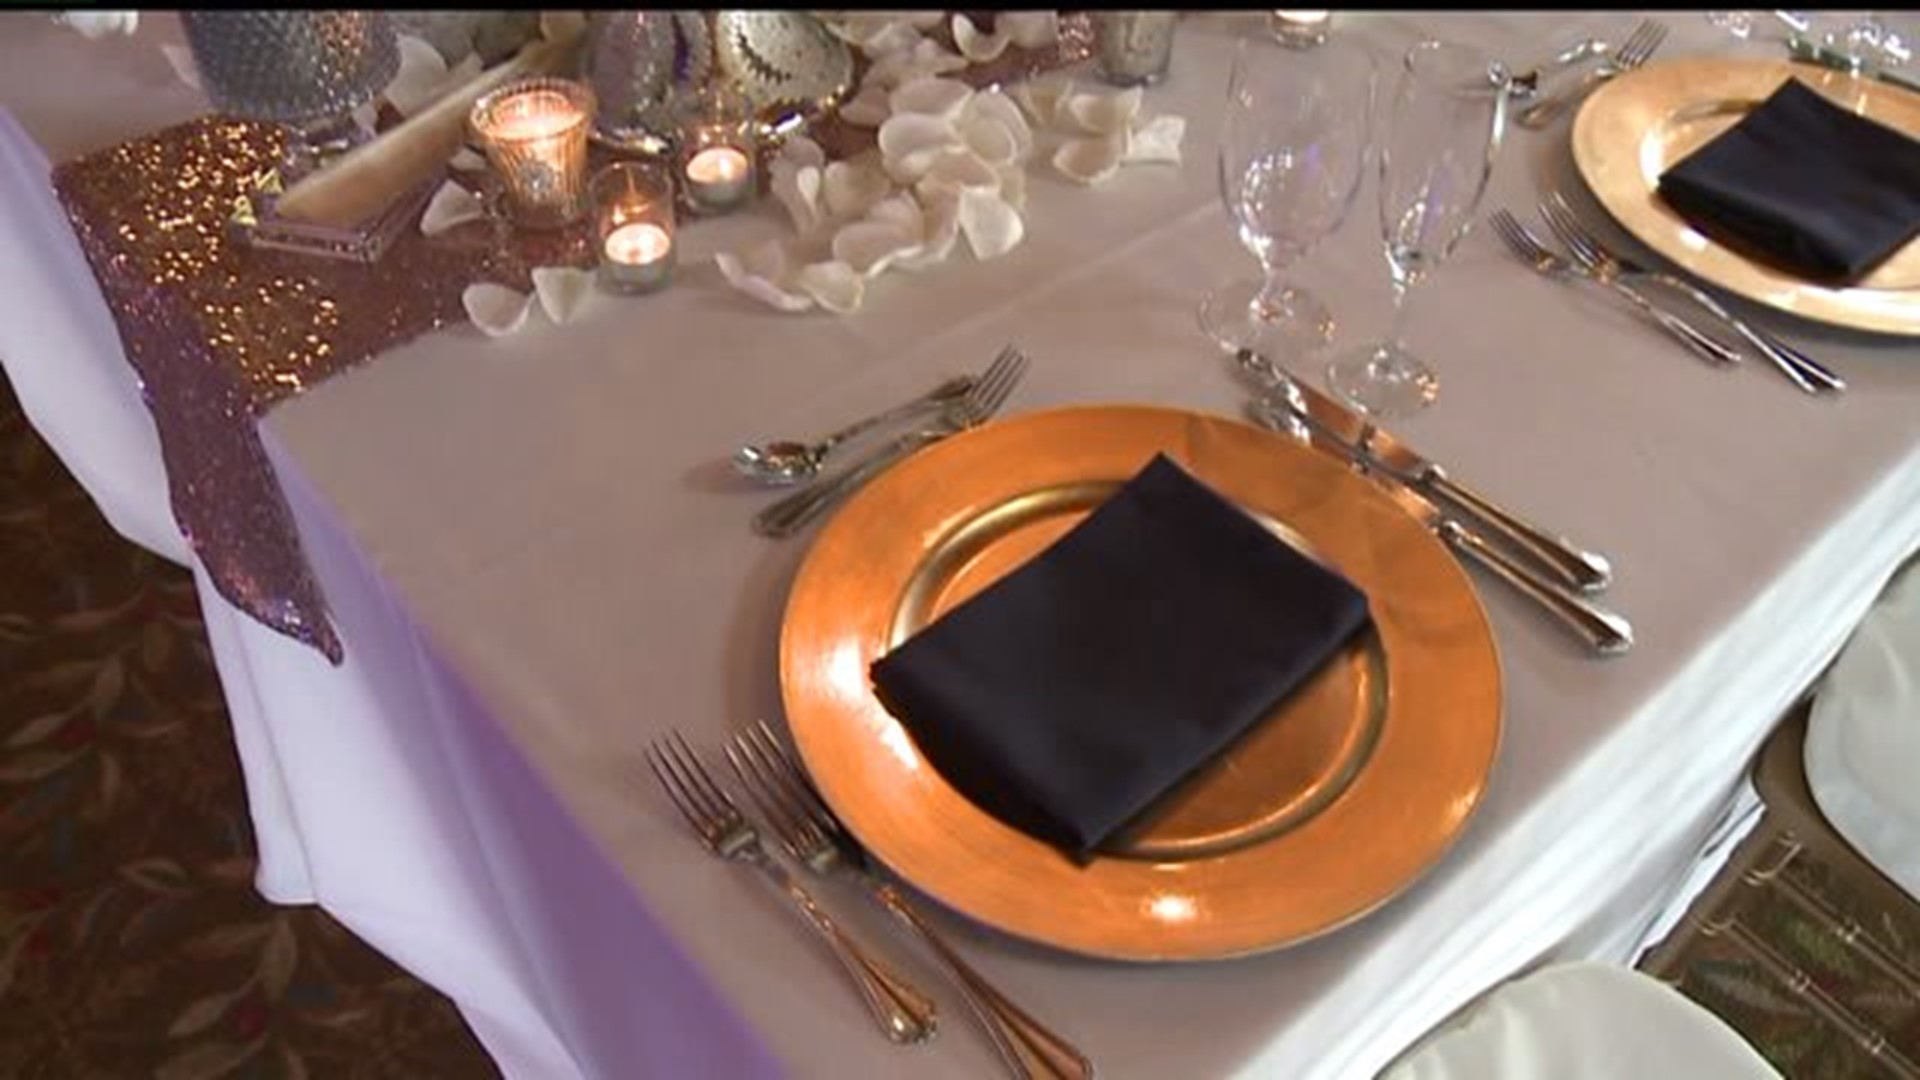 The Hershey Country Club has tips on customizing your wedding day without blowing your budget